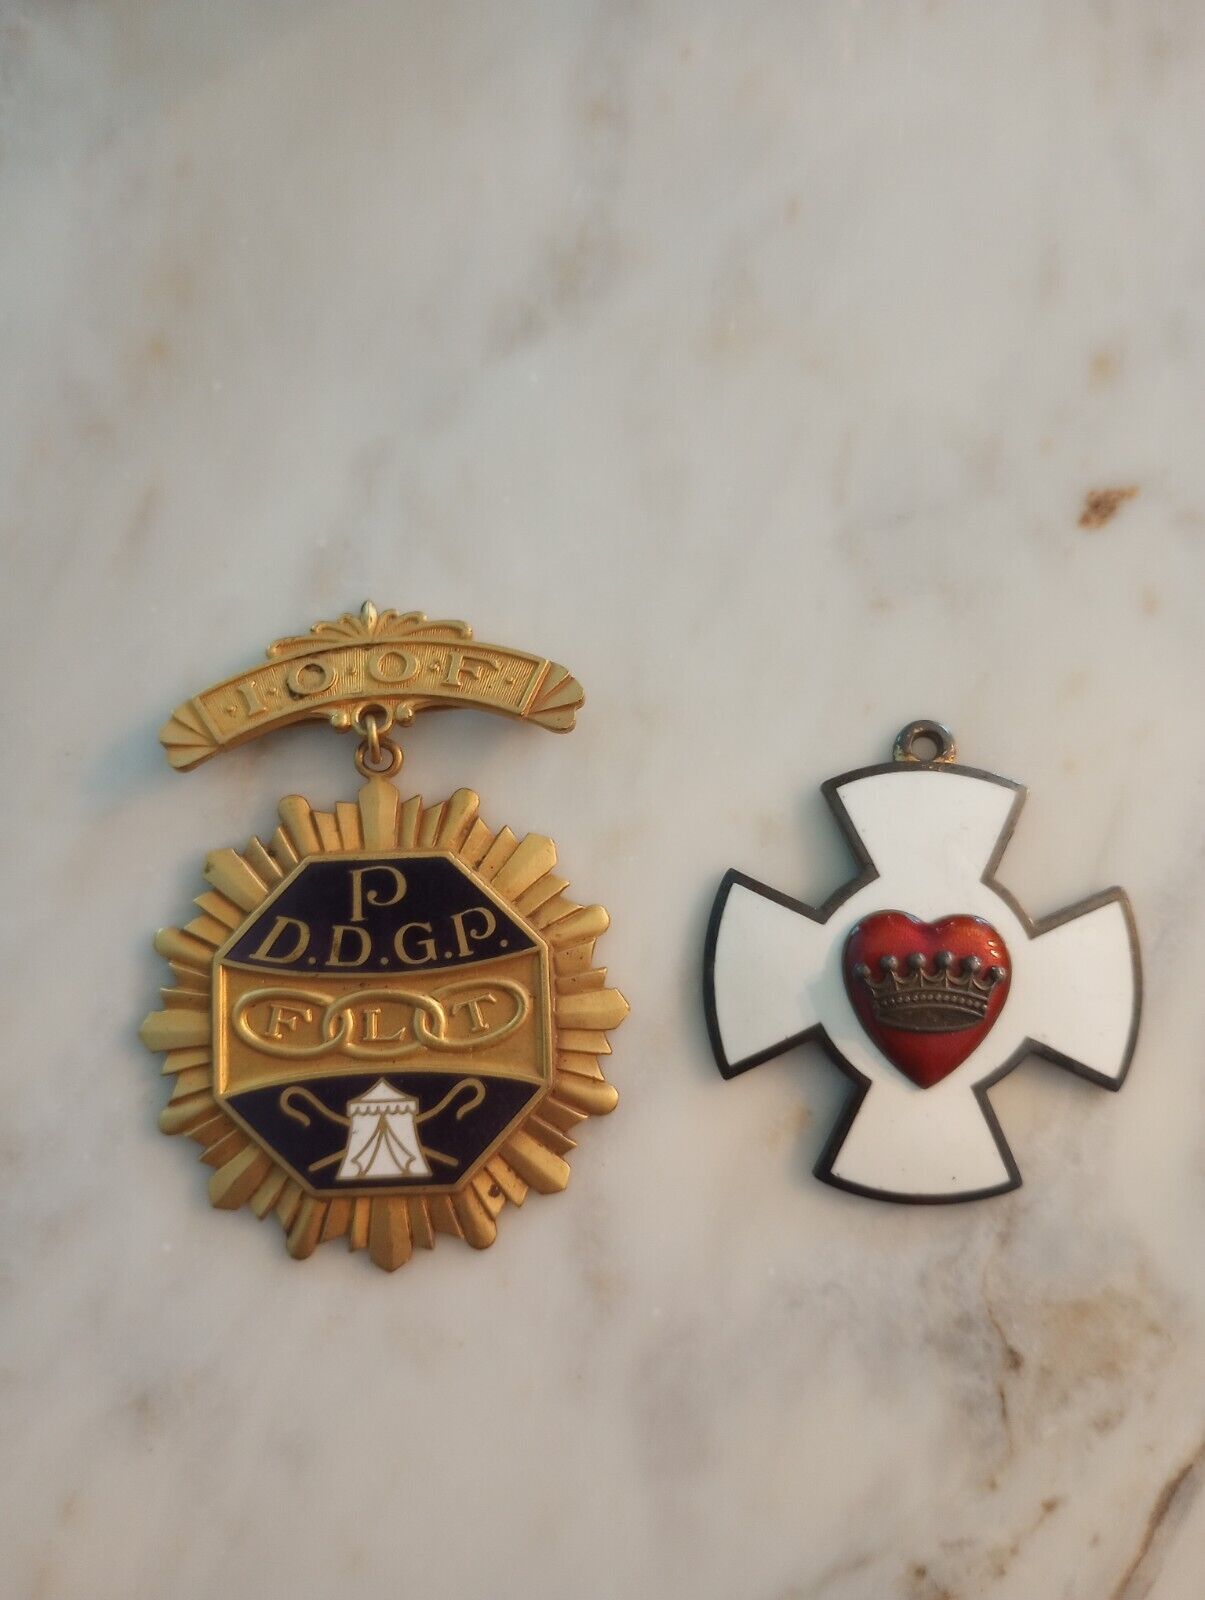 Pair Of I.O.O.F / Oddfellows Medallions / Badges / Medals